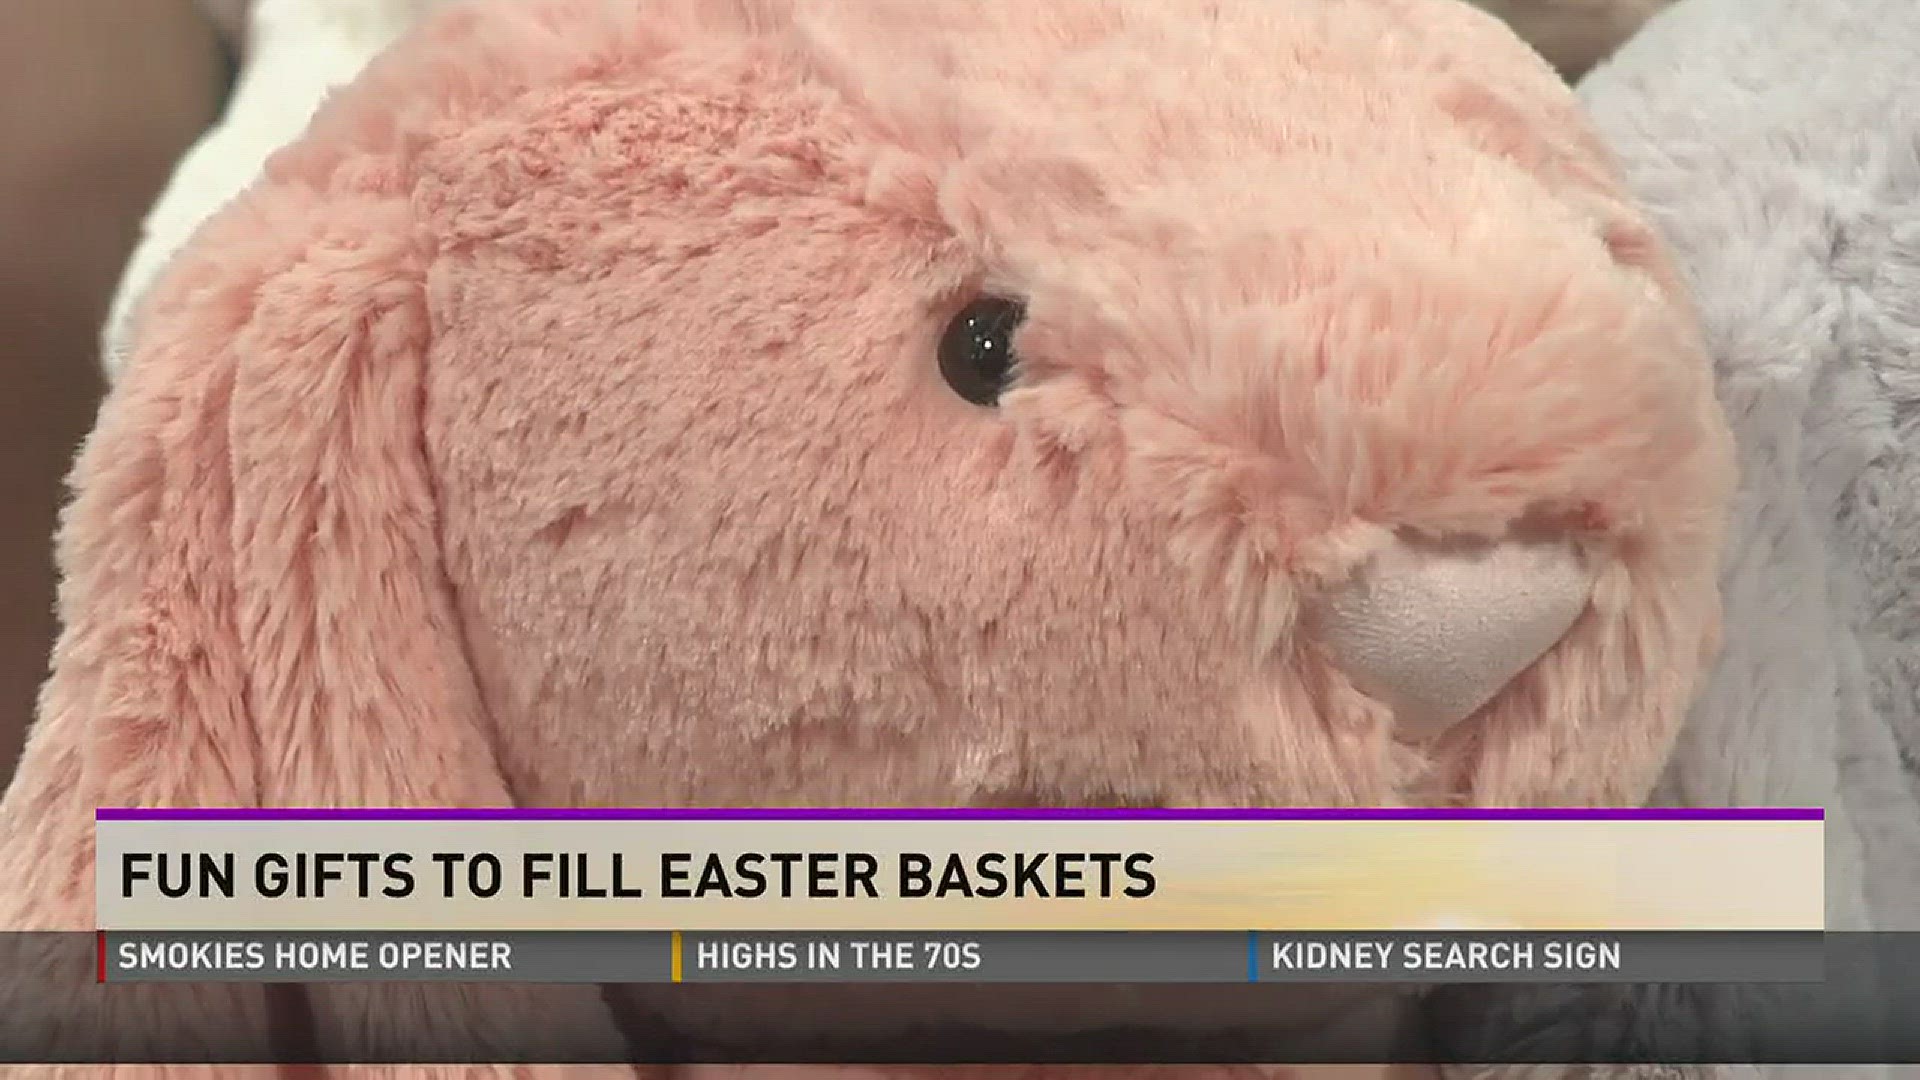 Fun Gifts to Fill Easter Baskets